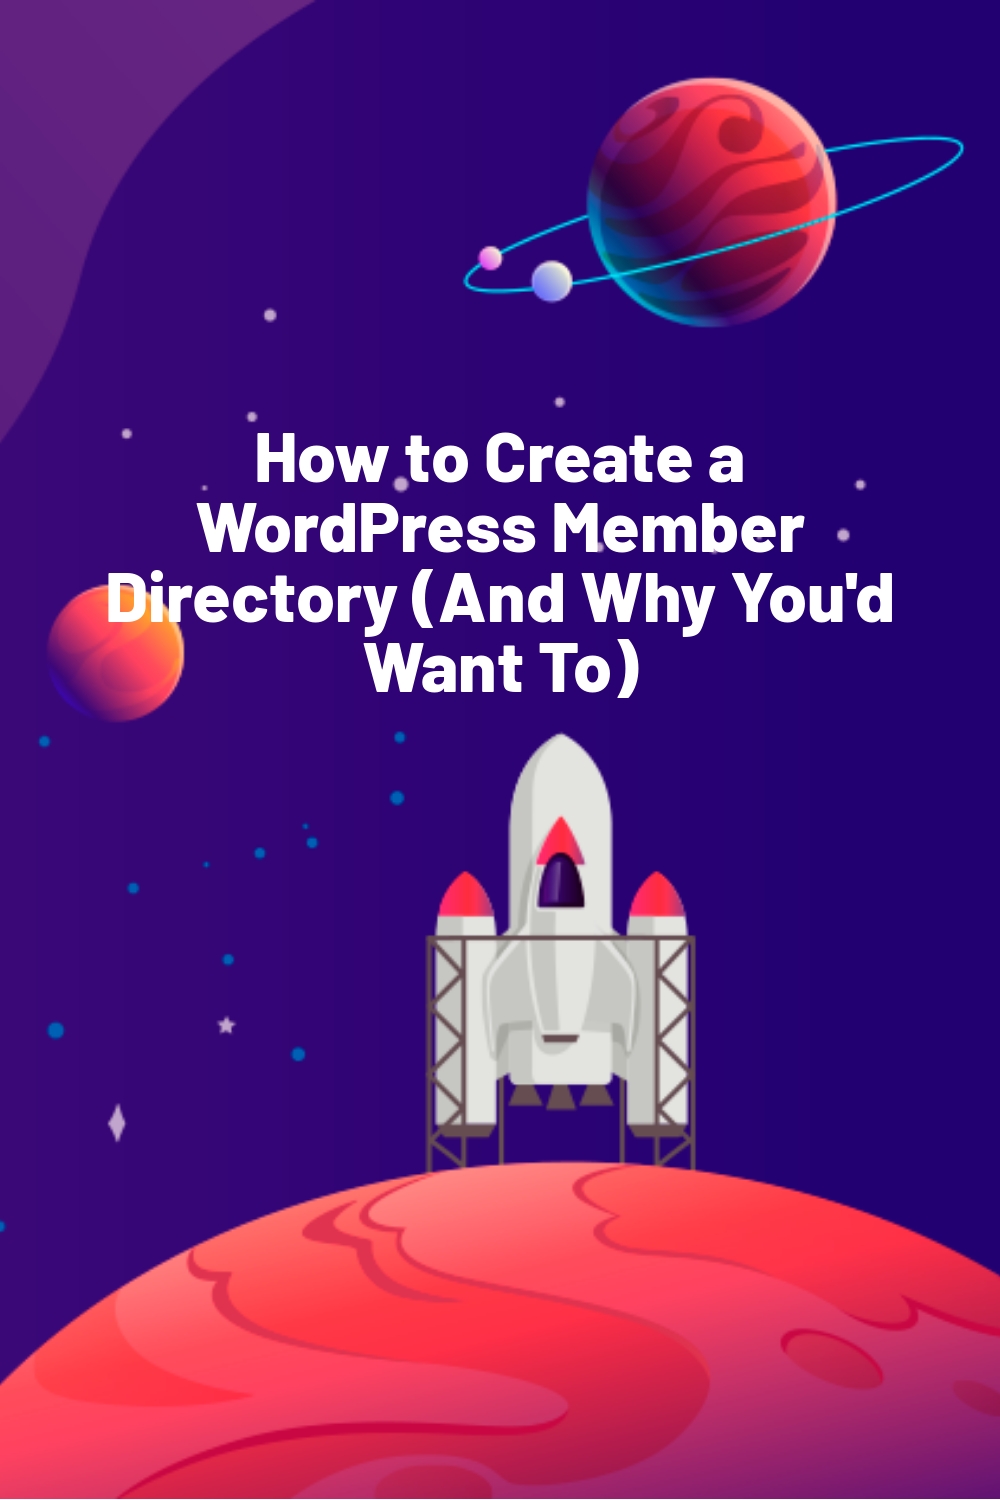 How to Create a WordPress Member Directory (And Why You’d Want To)